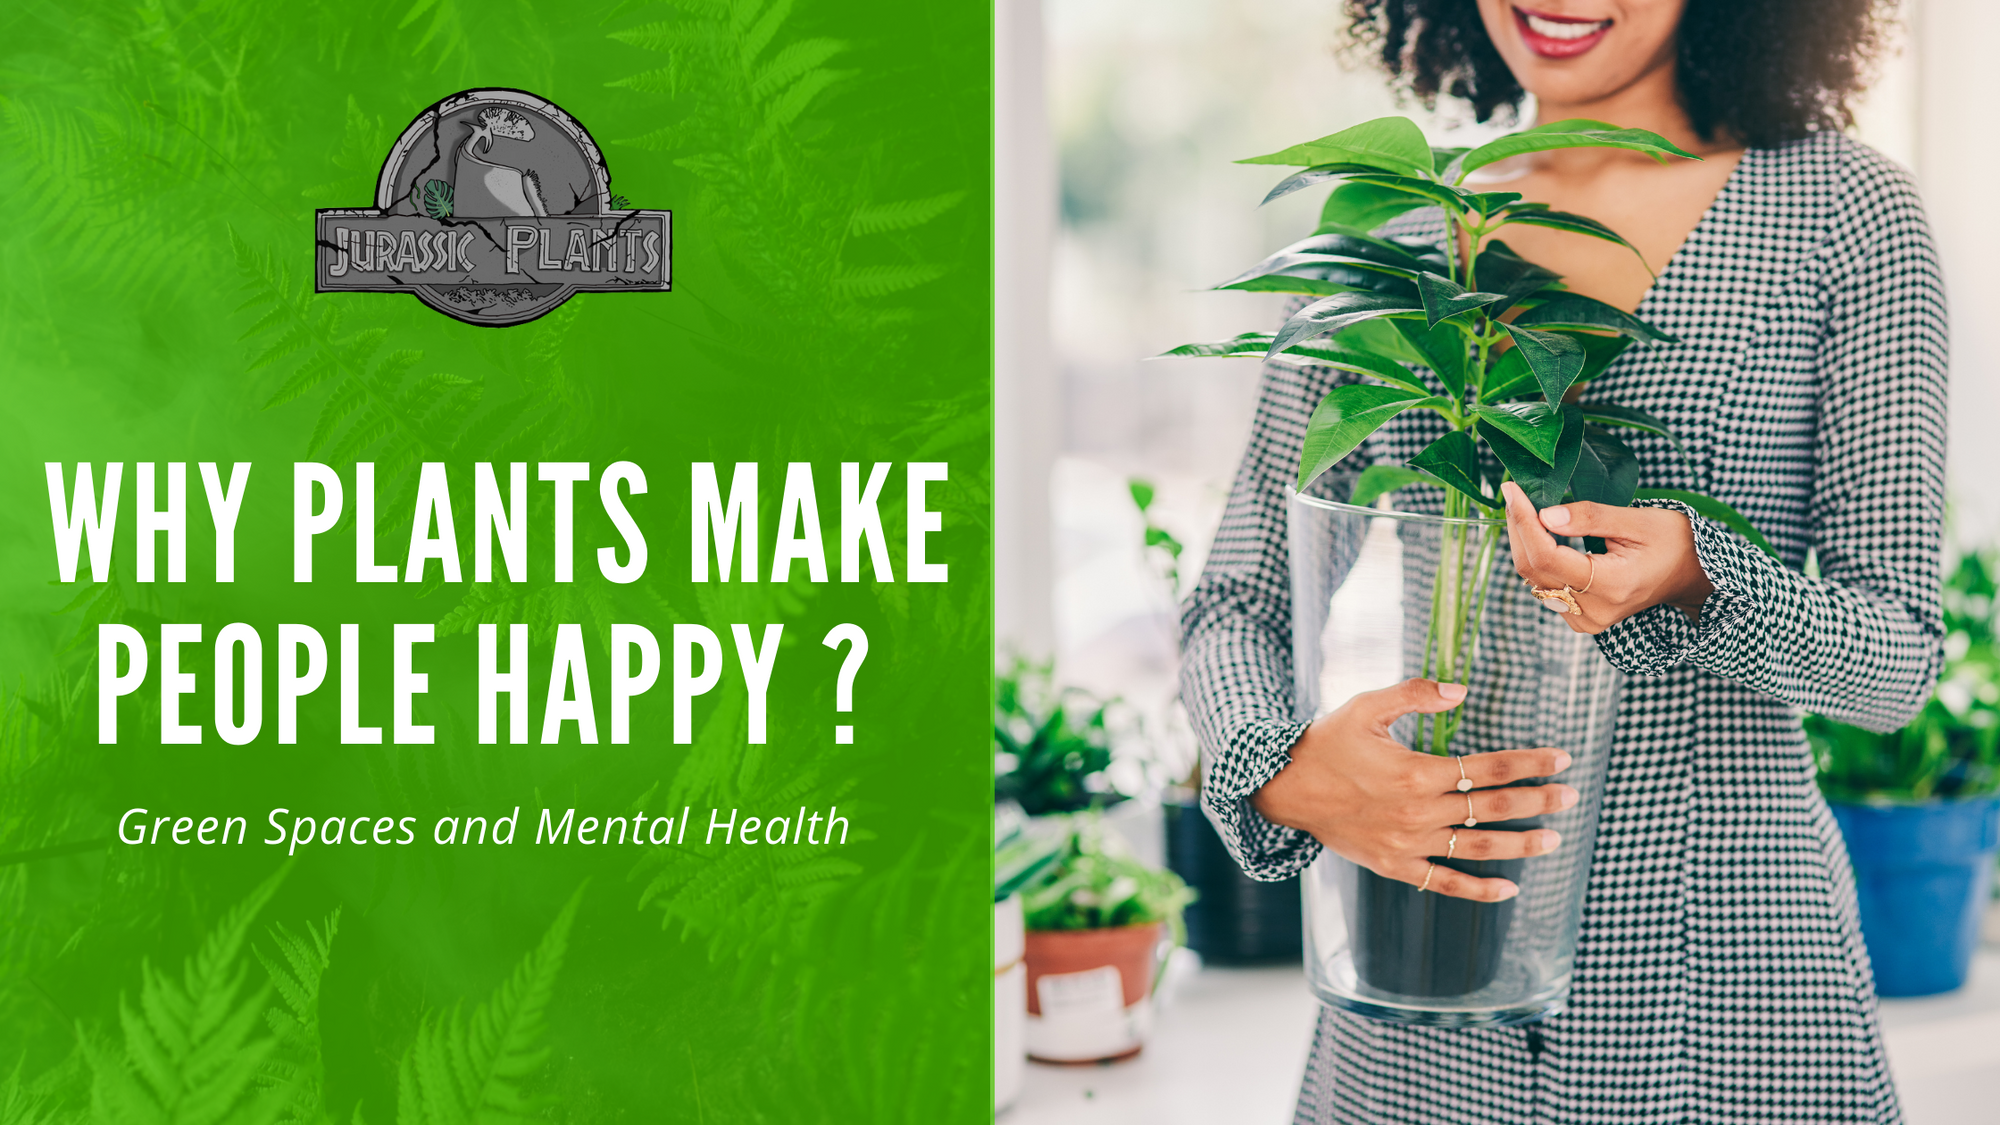 Why "Plants Make People Happy"?